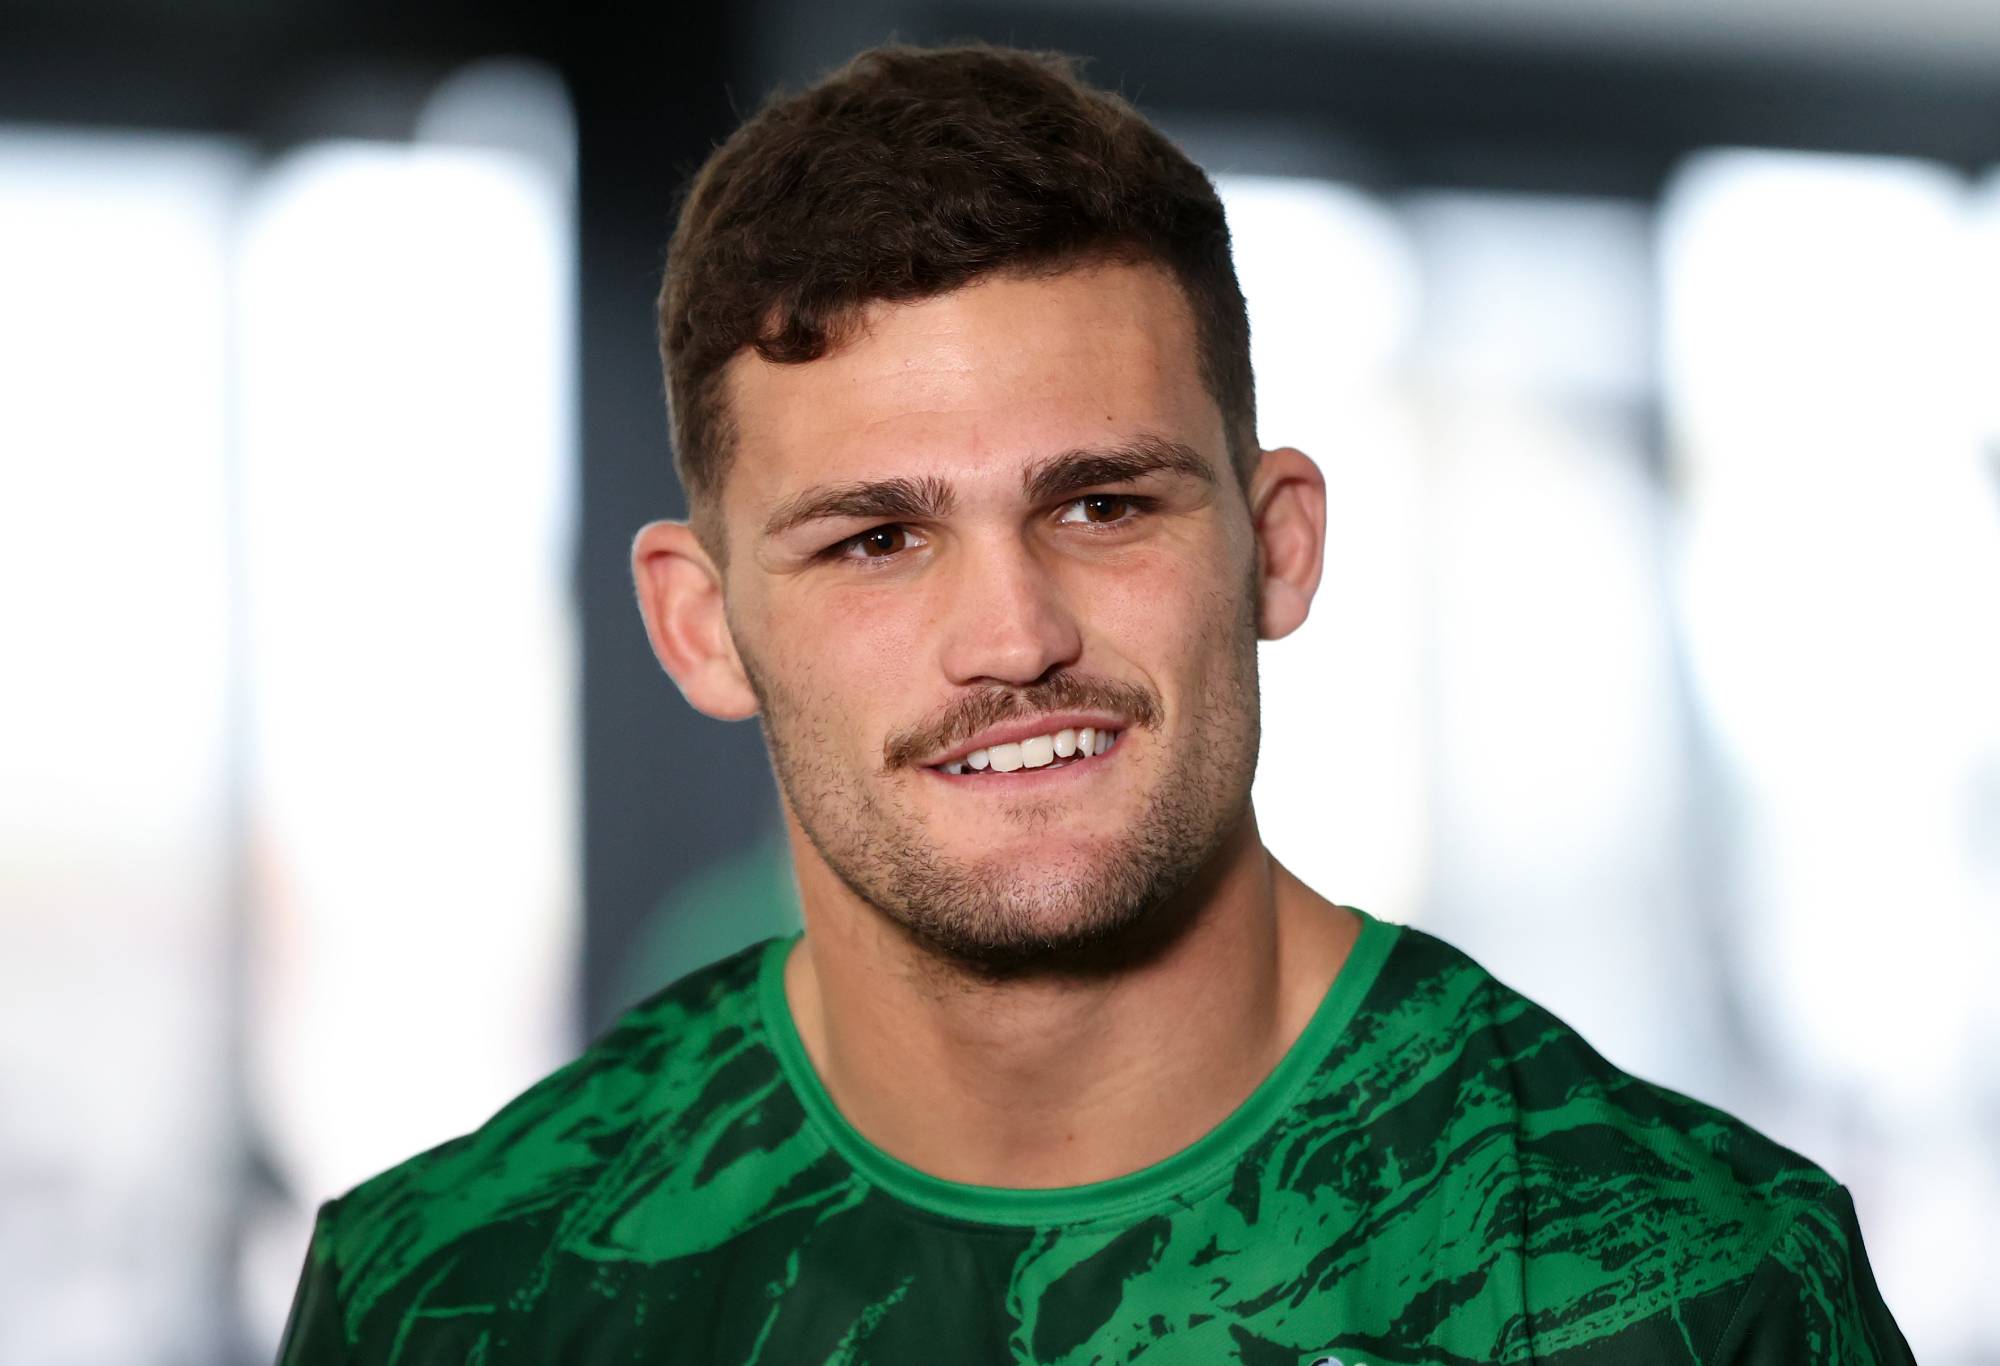 SYDNEY, AUSTRALIA - OCTOBER 06: Nathan Cleary speaks to the media during an Australia Kangaroos media opportunity ahead of the Rugby League World Cup at E-Lab Training on October 06, 2022 in Sydney, Australia. (Photo by Brendon Thorne/Getty Images)